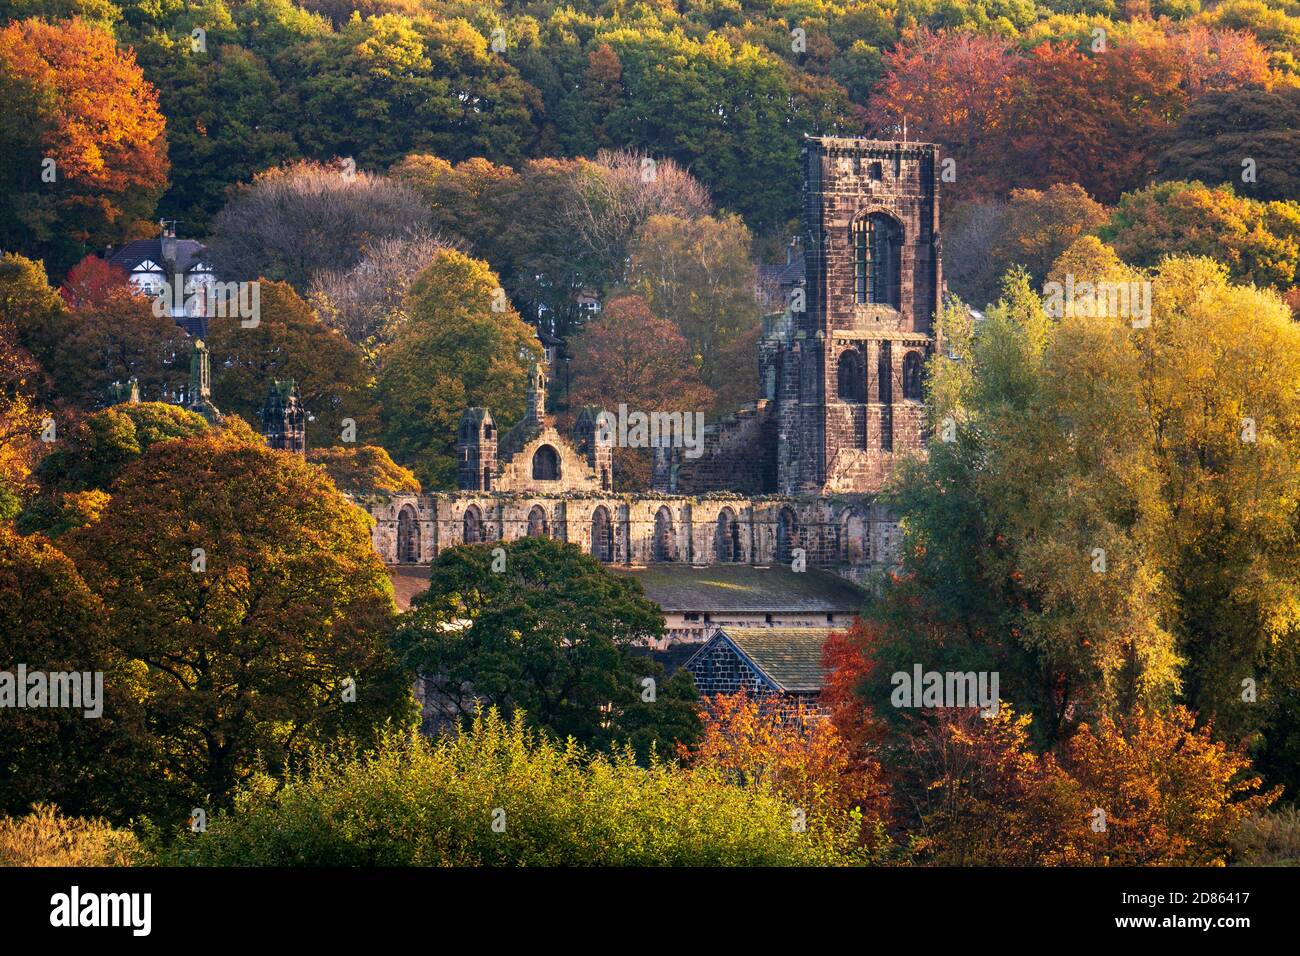 The rich autumn foliage surrounding the ruined tower of Kirkstall Abbey glows as early morning light illuminates the October scene. Stock Photo